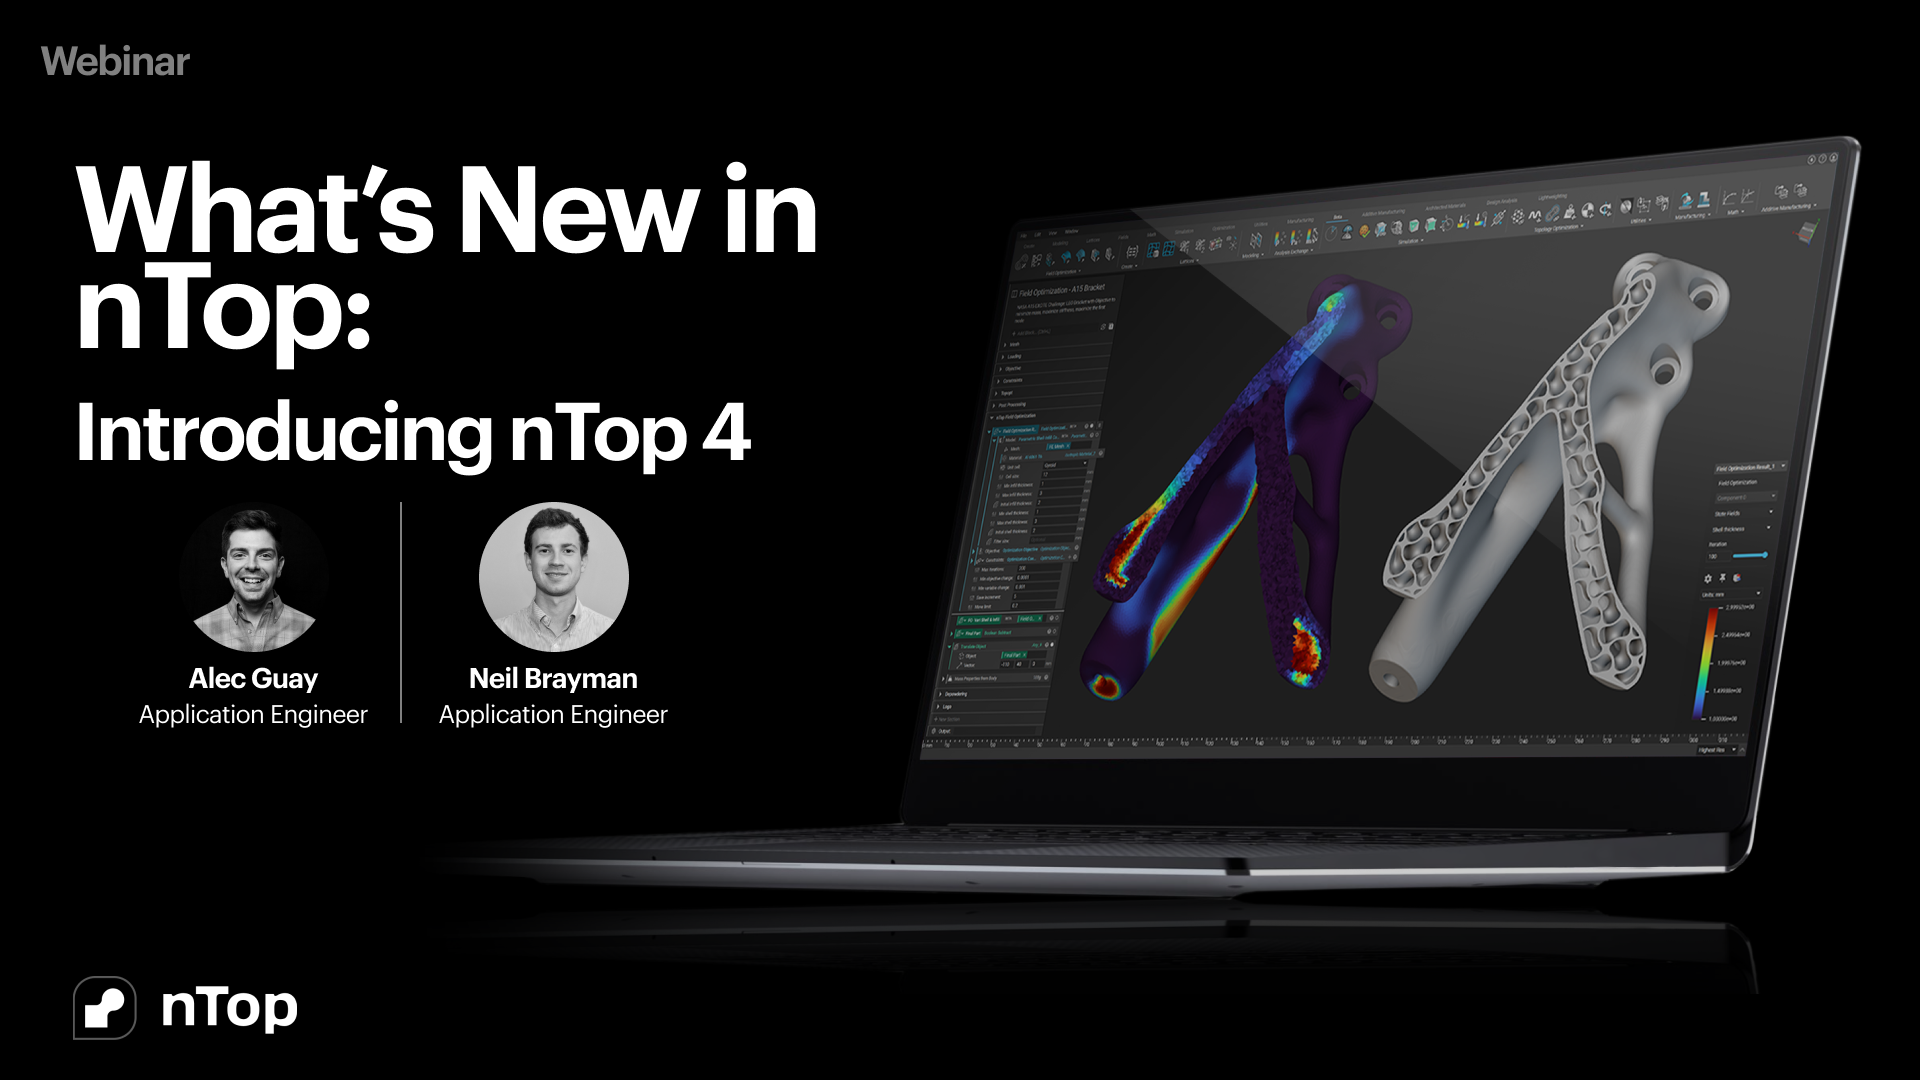 Introducing nTop 4, the latest major update to our software.